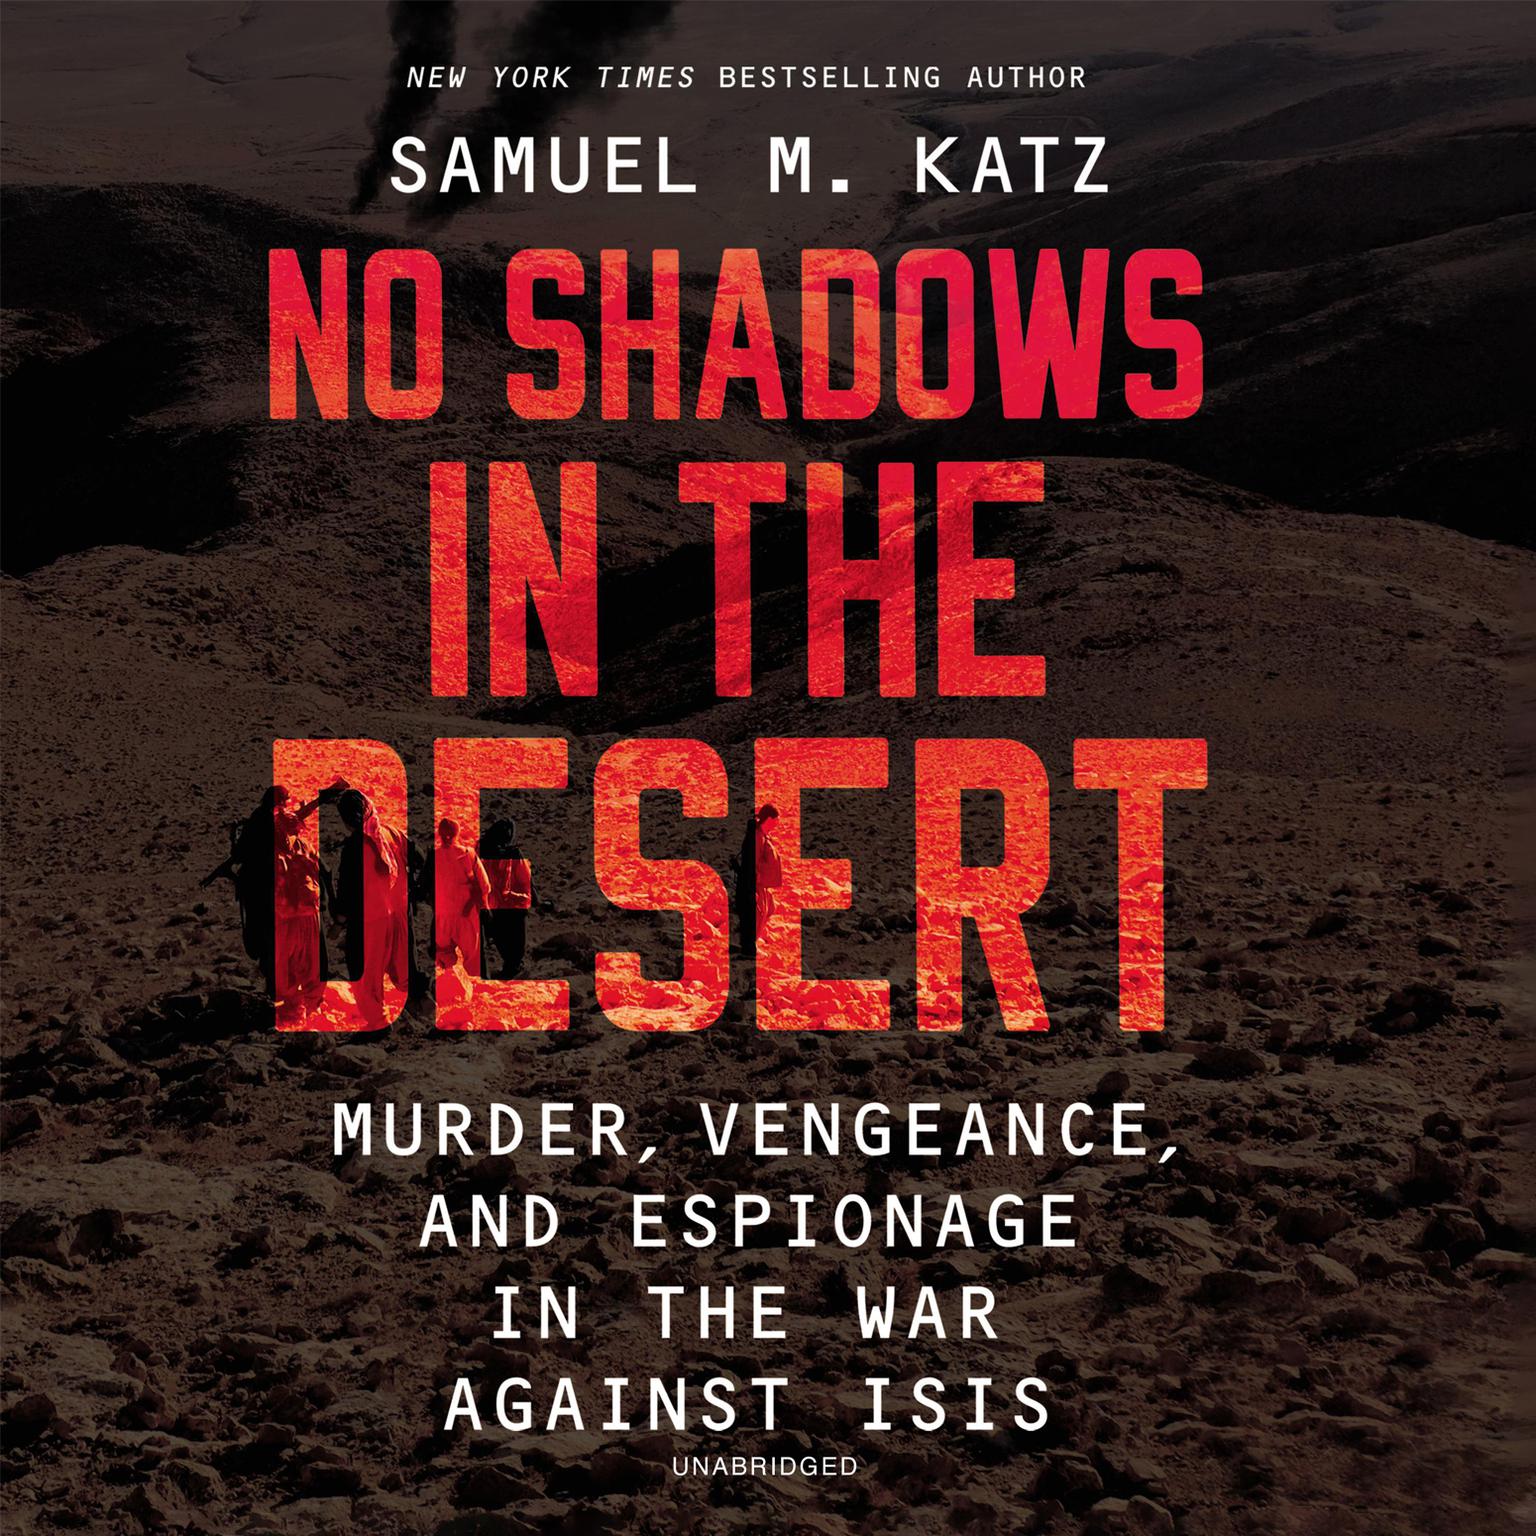 No Shadows in the Desert: Murder, Vengeance, and Espionage in the War Against ISIS Audiobook, by Samuel M. Katz